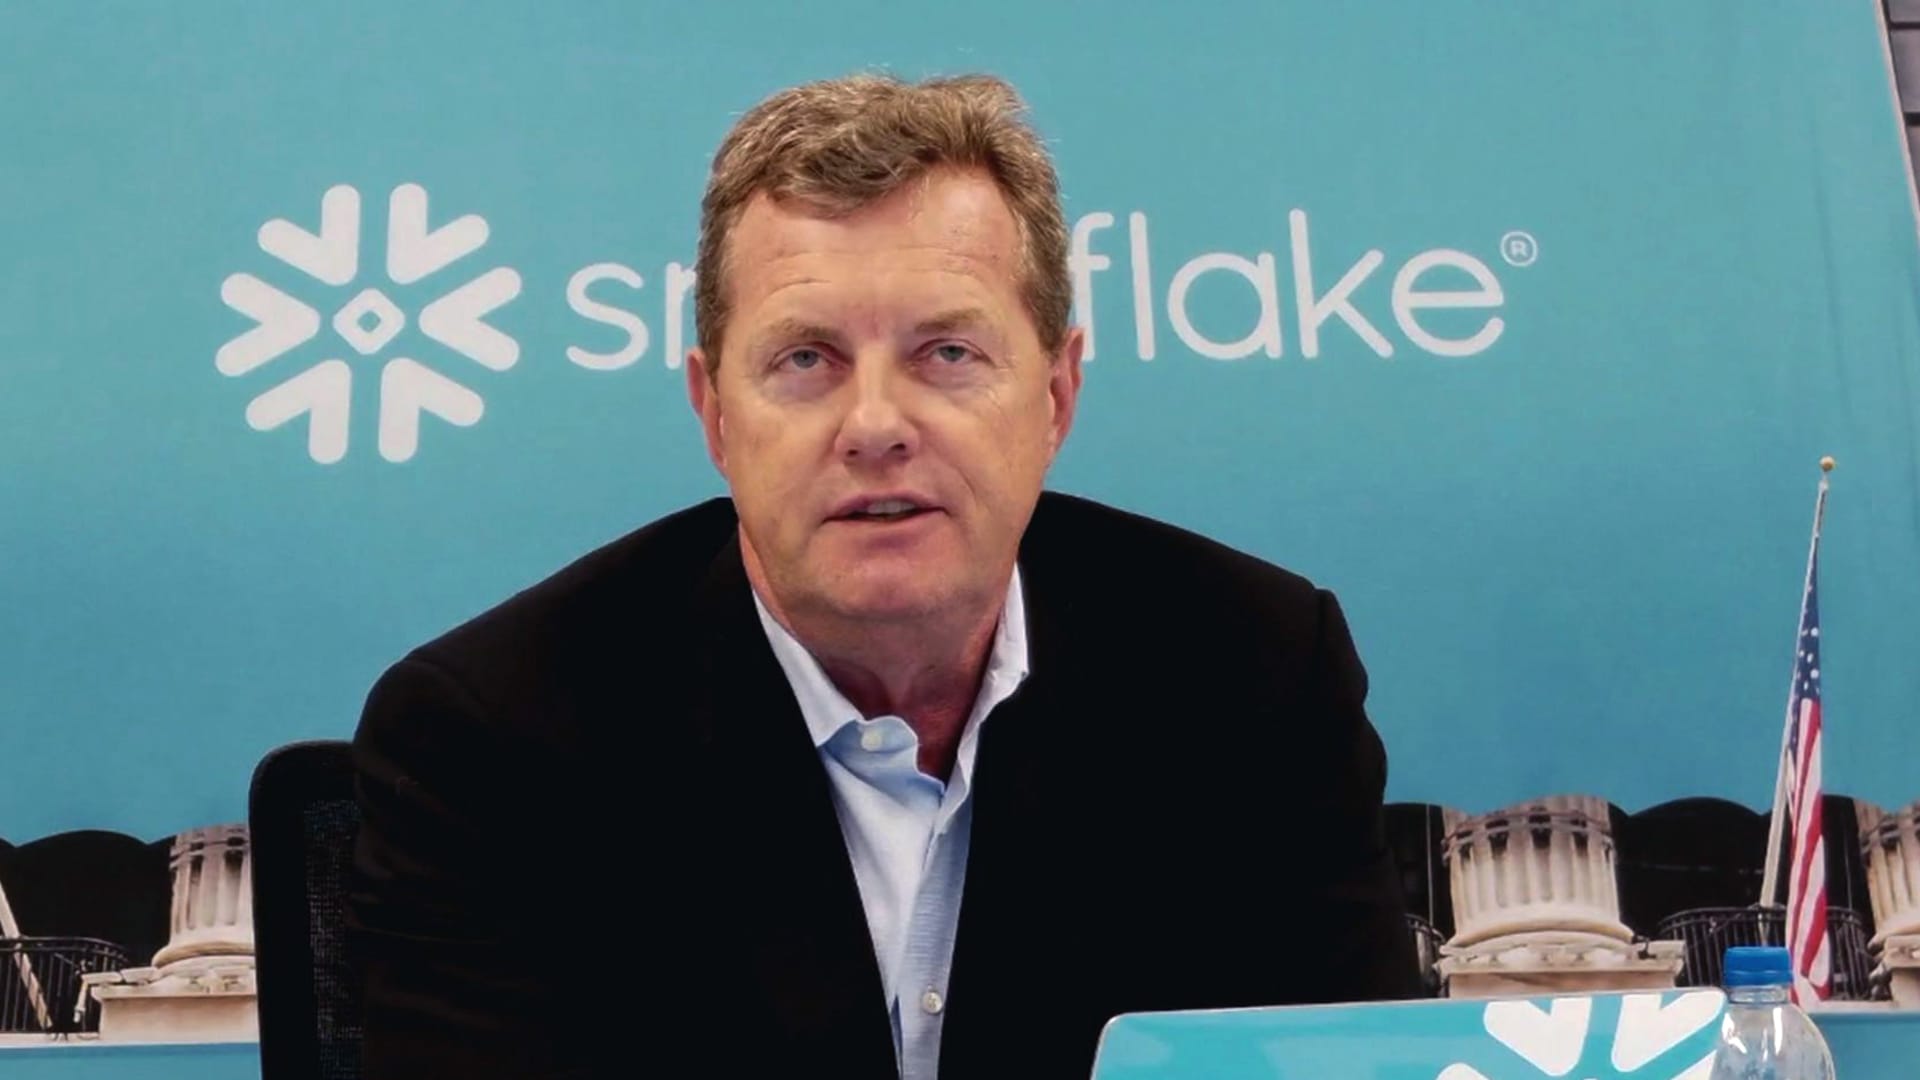 Despite uncomfortable guidance, Snowflake CEO says he is optimistic about the future